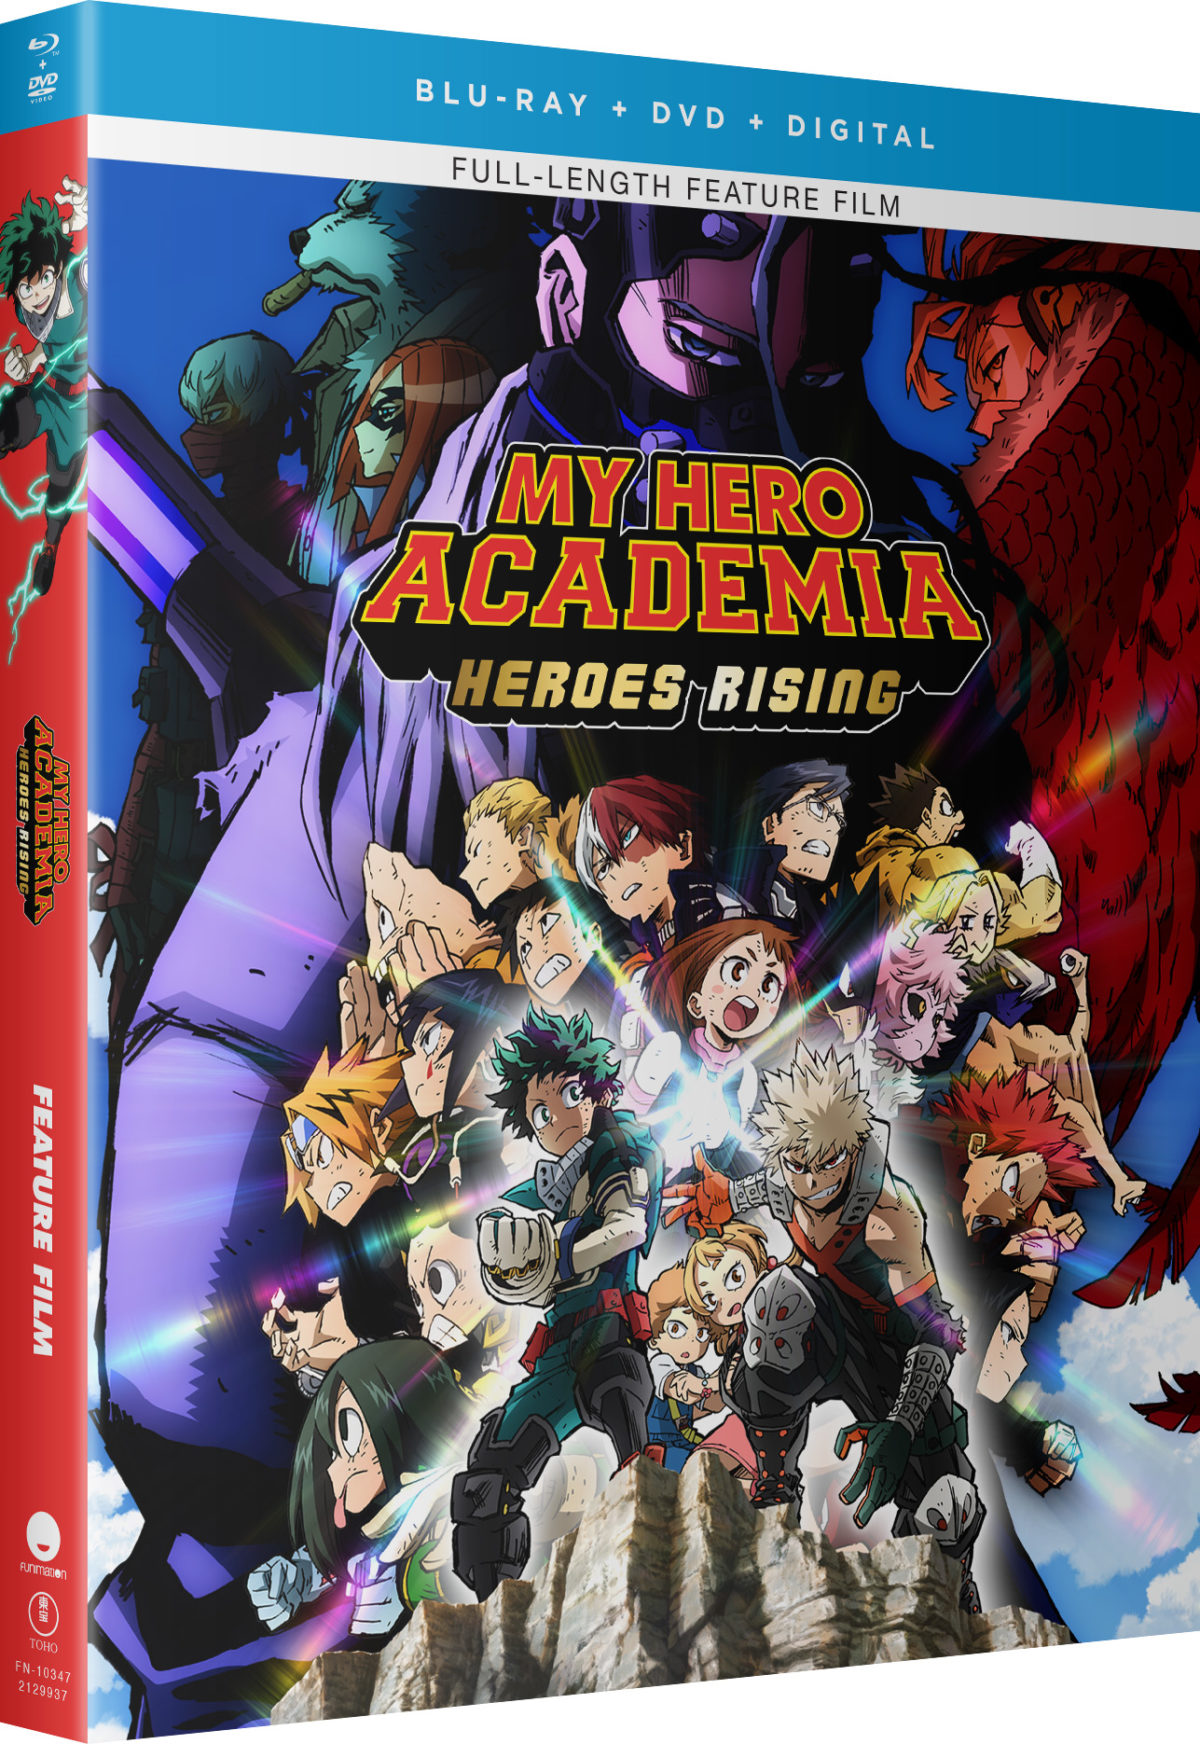 My Hero Academia: Heroes Rising Movie Bundle out October 27th